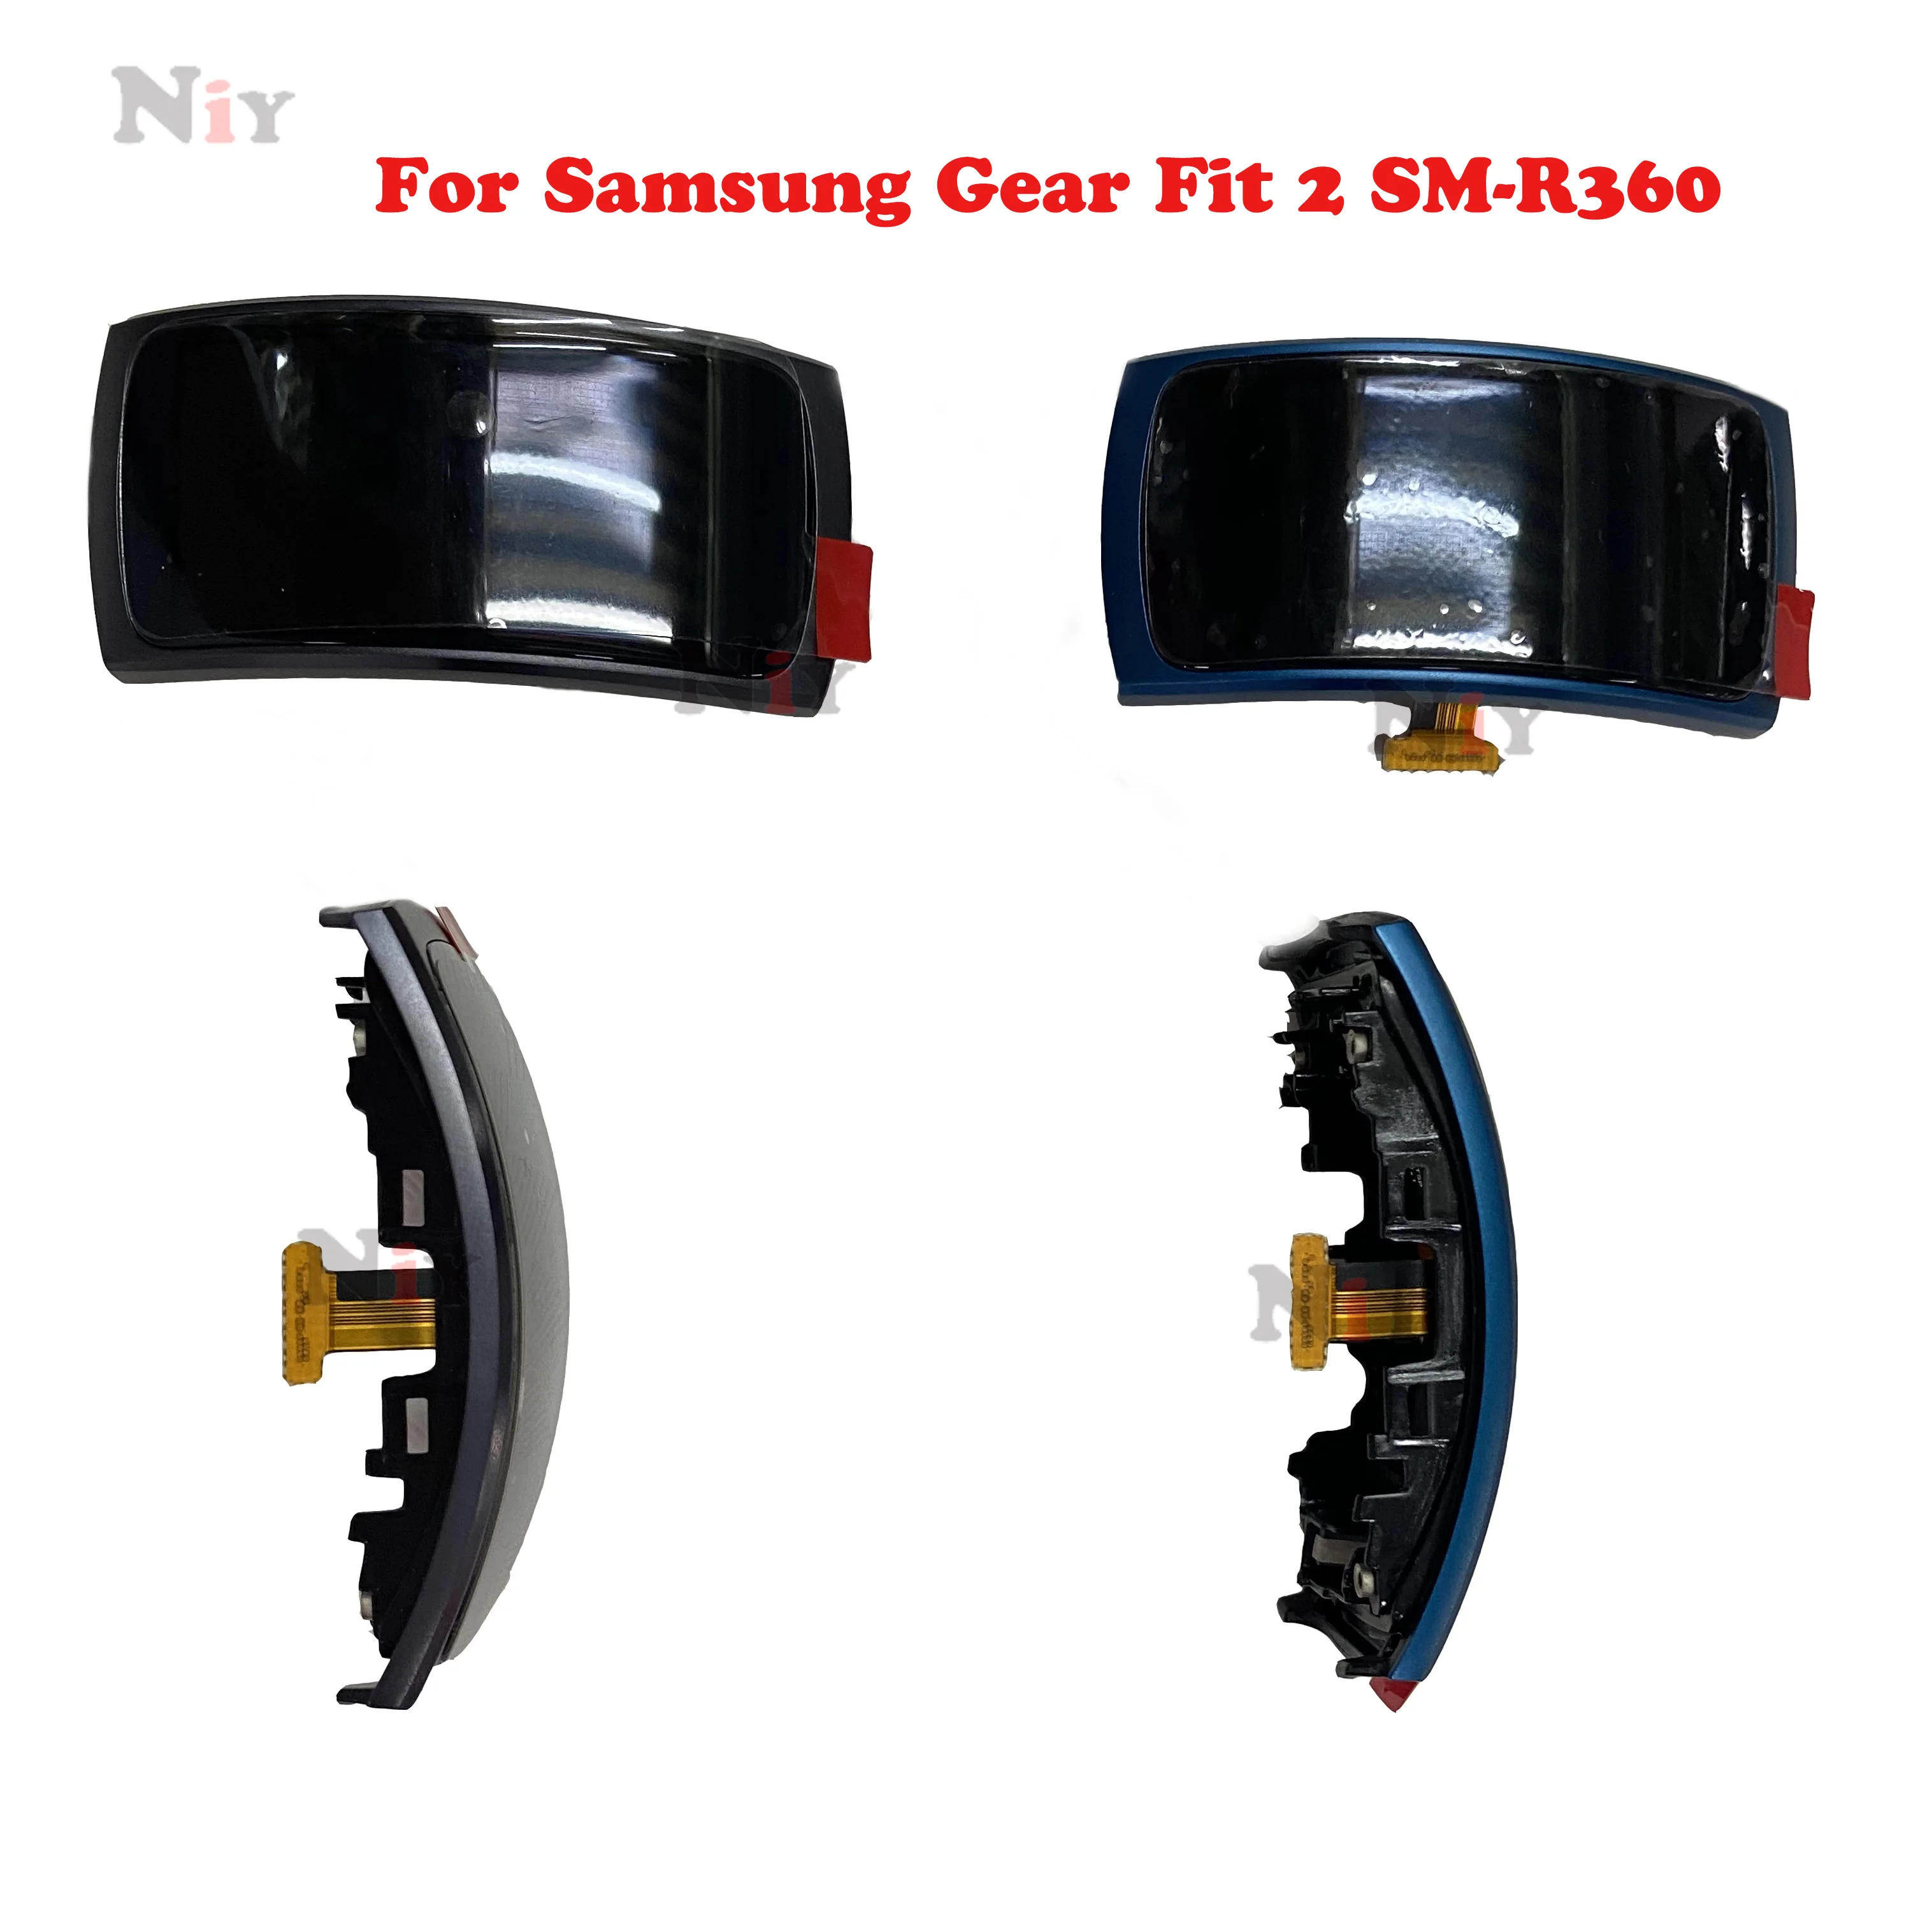 Suitable for original Samsung Gear Fit 2 SM-R360 blue LCD screen and digitizer-GH97-19001B